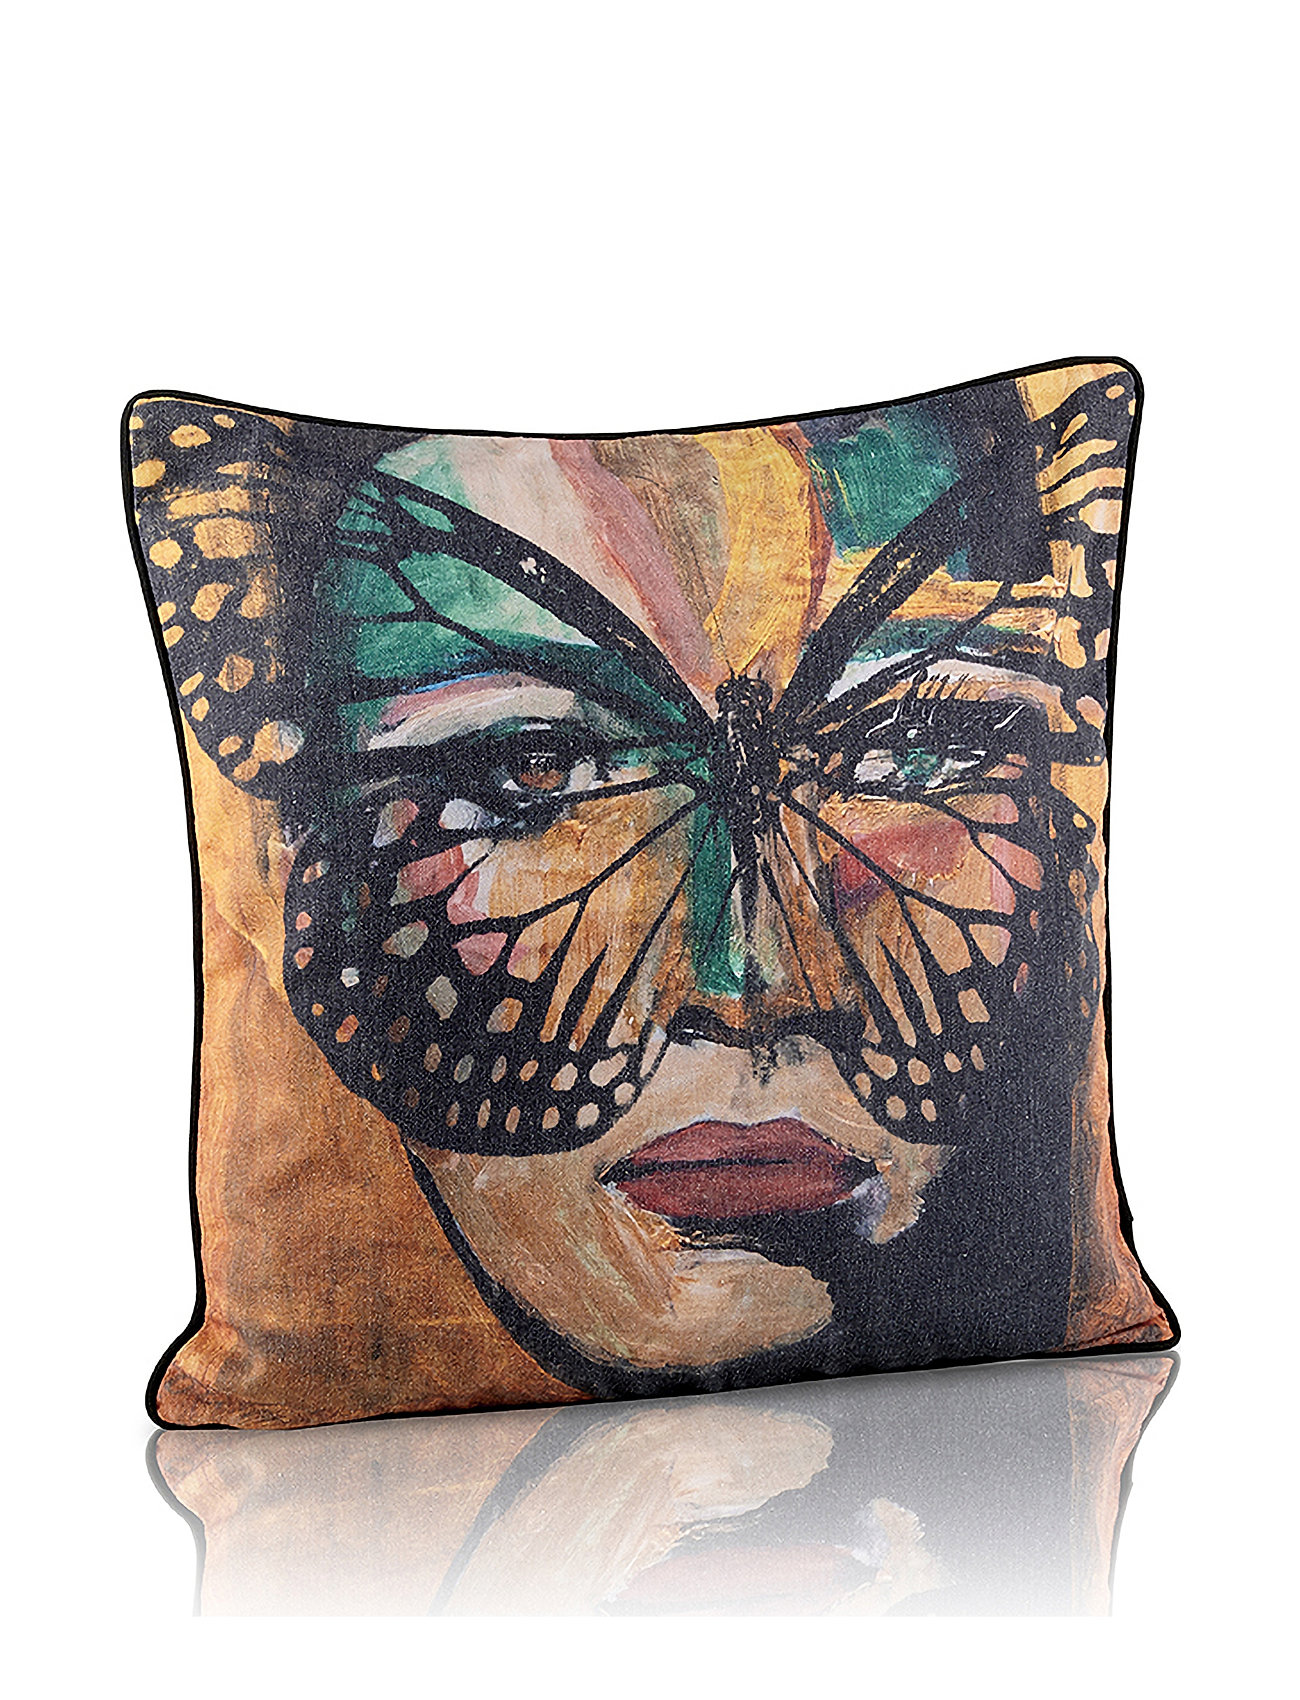 Secret Butterfly - Pillow Case Home Textiles Cushions & Blankets Cushion Covers Orange Carolina Gynning